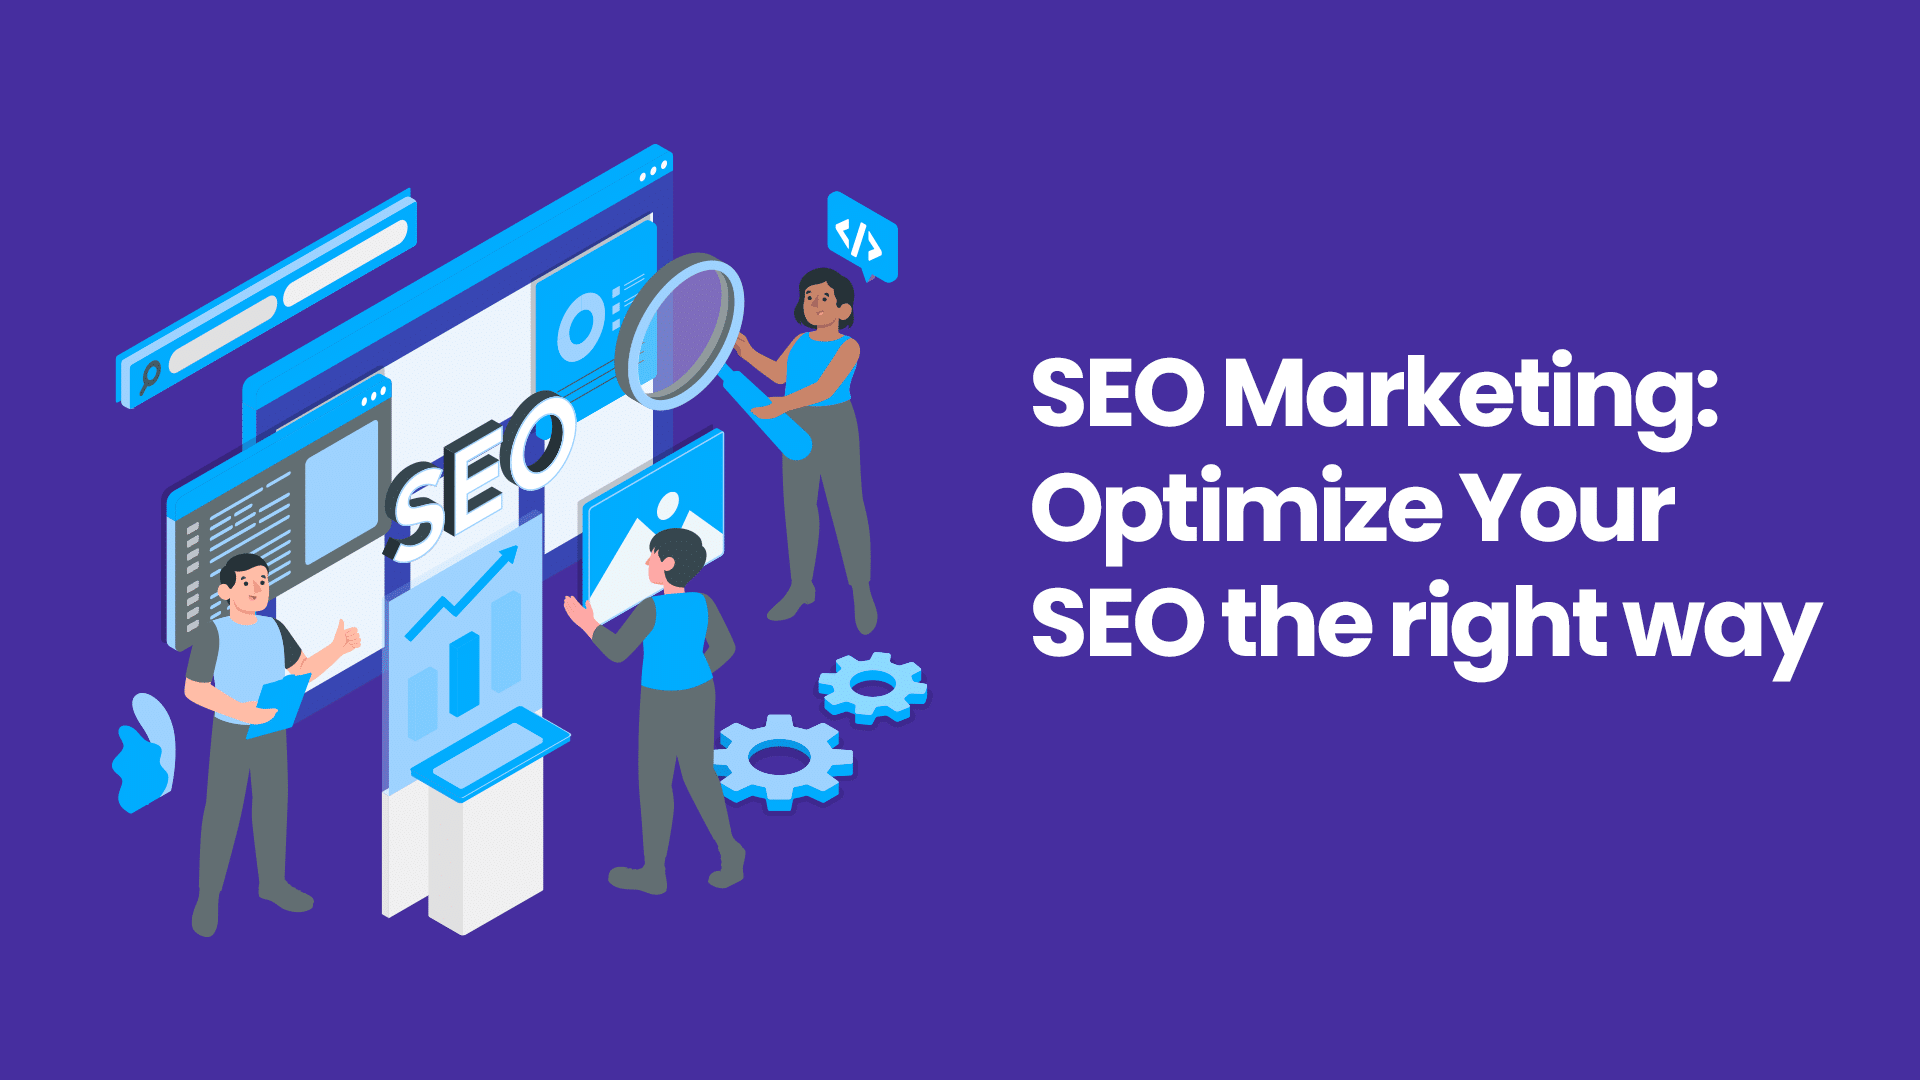 SEO Marketing: Optimize Your SEO the right way